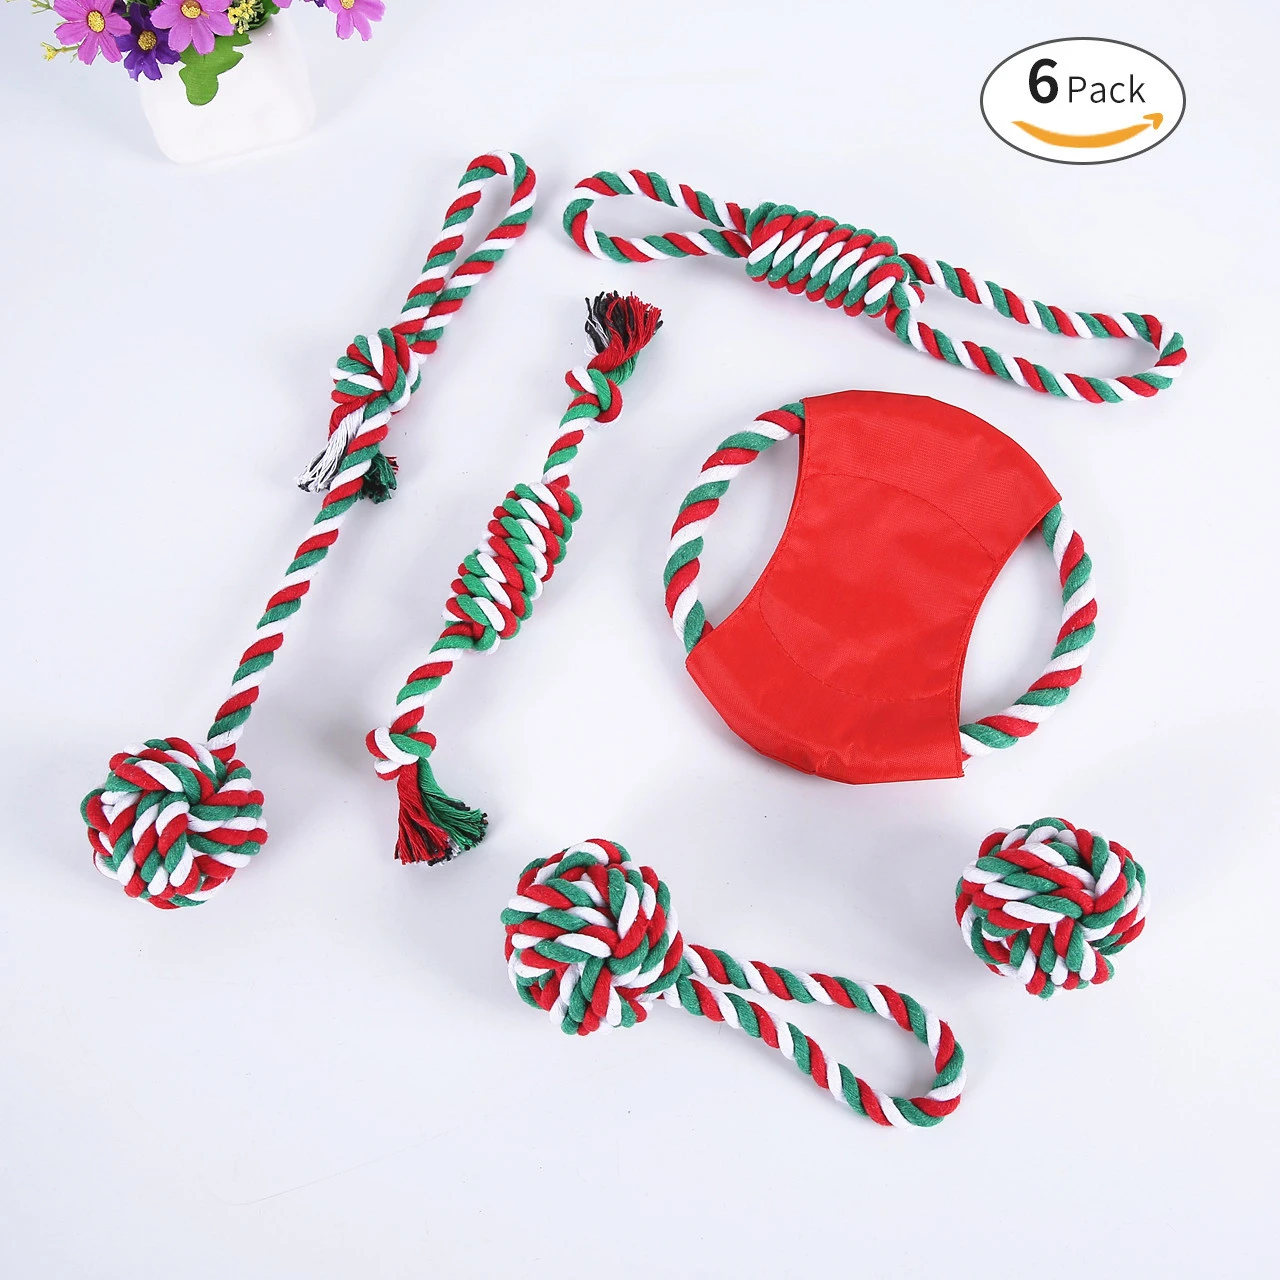 Pet supplies dog cotton rope toys molar Christmas pet toy set  chew pet puppy toys gift set ball rope